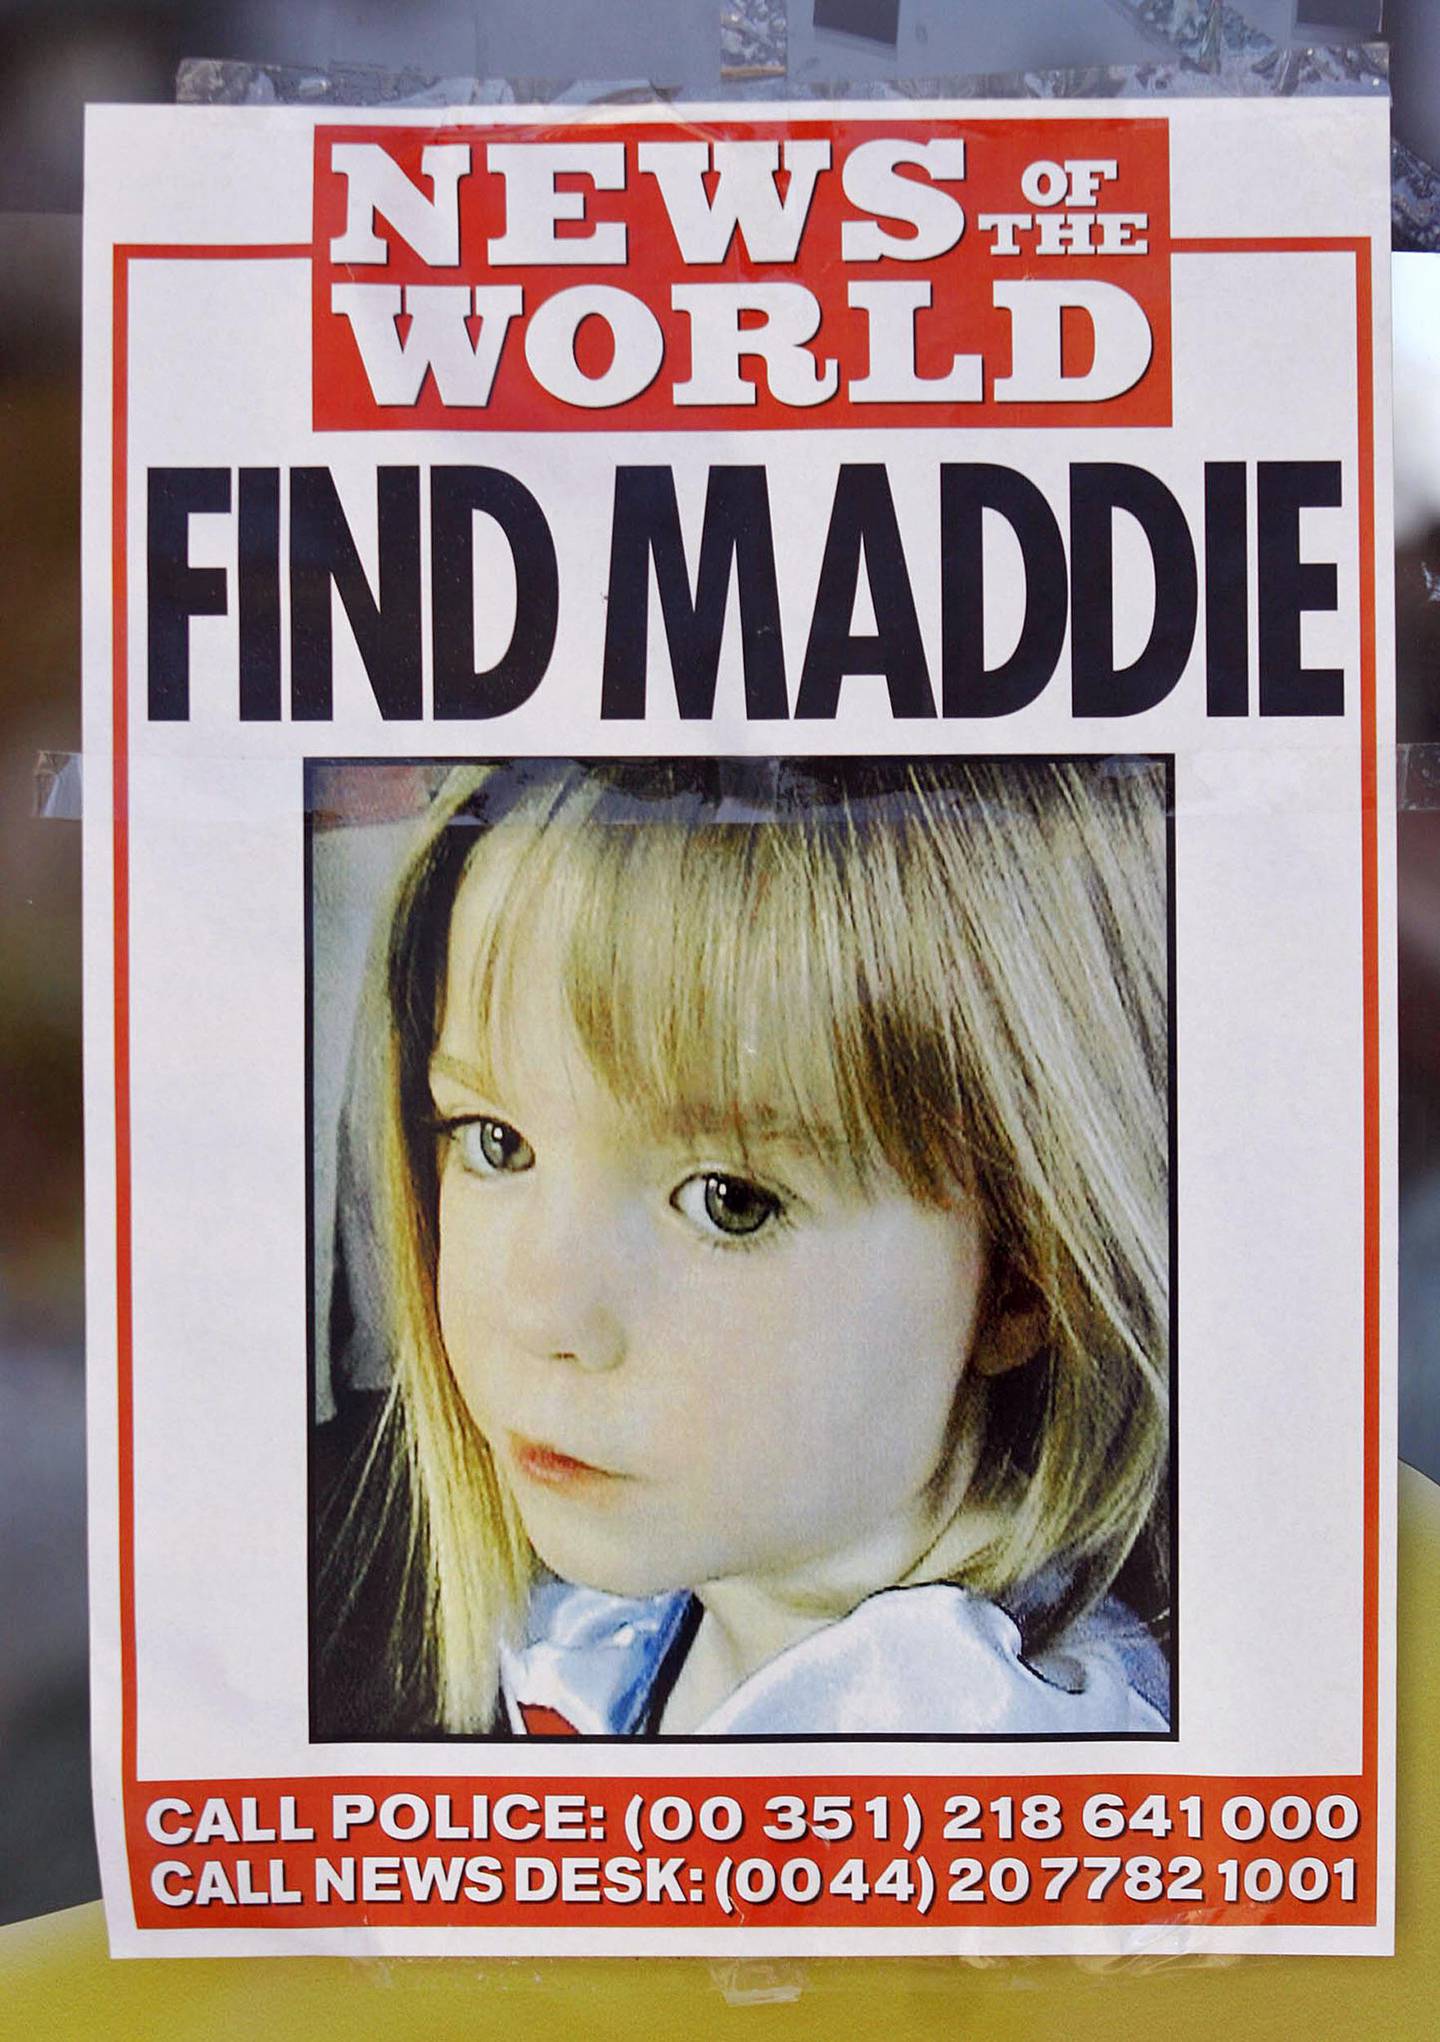 (FILES) This file photo taken on May 13, 2007 shows a poster displaying the police and infos desk numbers for the missing four-year-old British girl Madeleine McCann in the area of the beach resort of Lagos, in Praia da Luz, southern Portugal.
Scarred by Madeleine McCann's disappearance 10 years ago, the seaside resort town of Praia da Luz in southern Portugal is struggling to shake off the mystery of the young British girl's disappearance.
Madeleine McCann (Maddie) disappeared on May 3, 2007. Portuguese police closed the case in 2008 before reopening it five years later. / AFP PHOTO / MELANIE MAPS